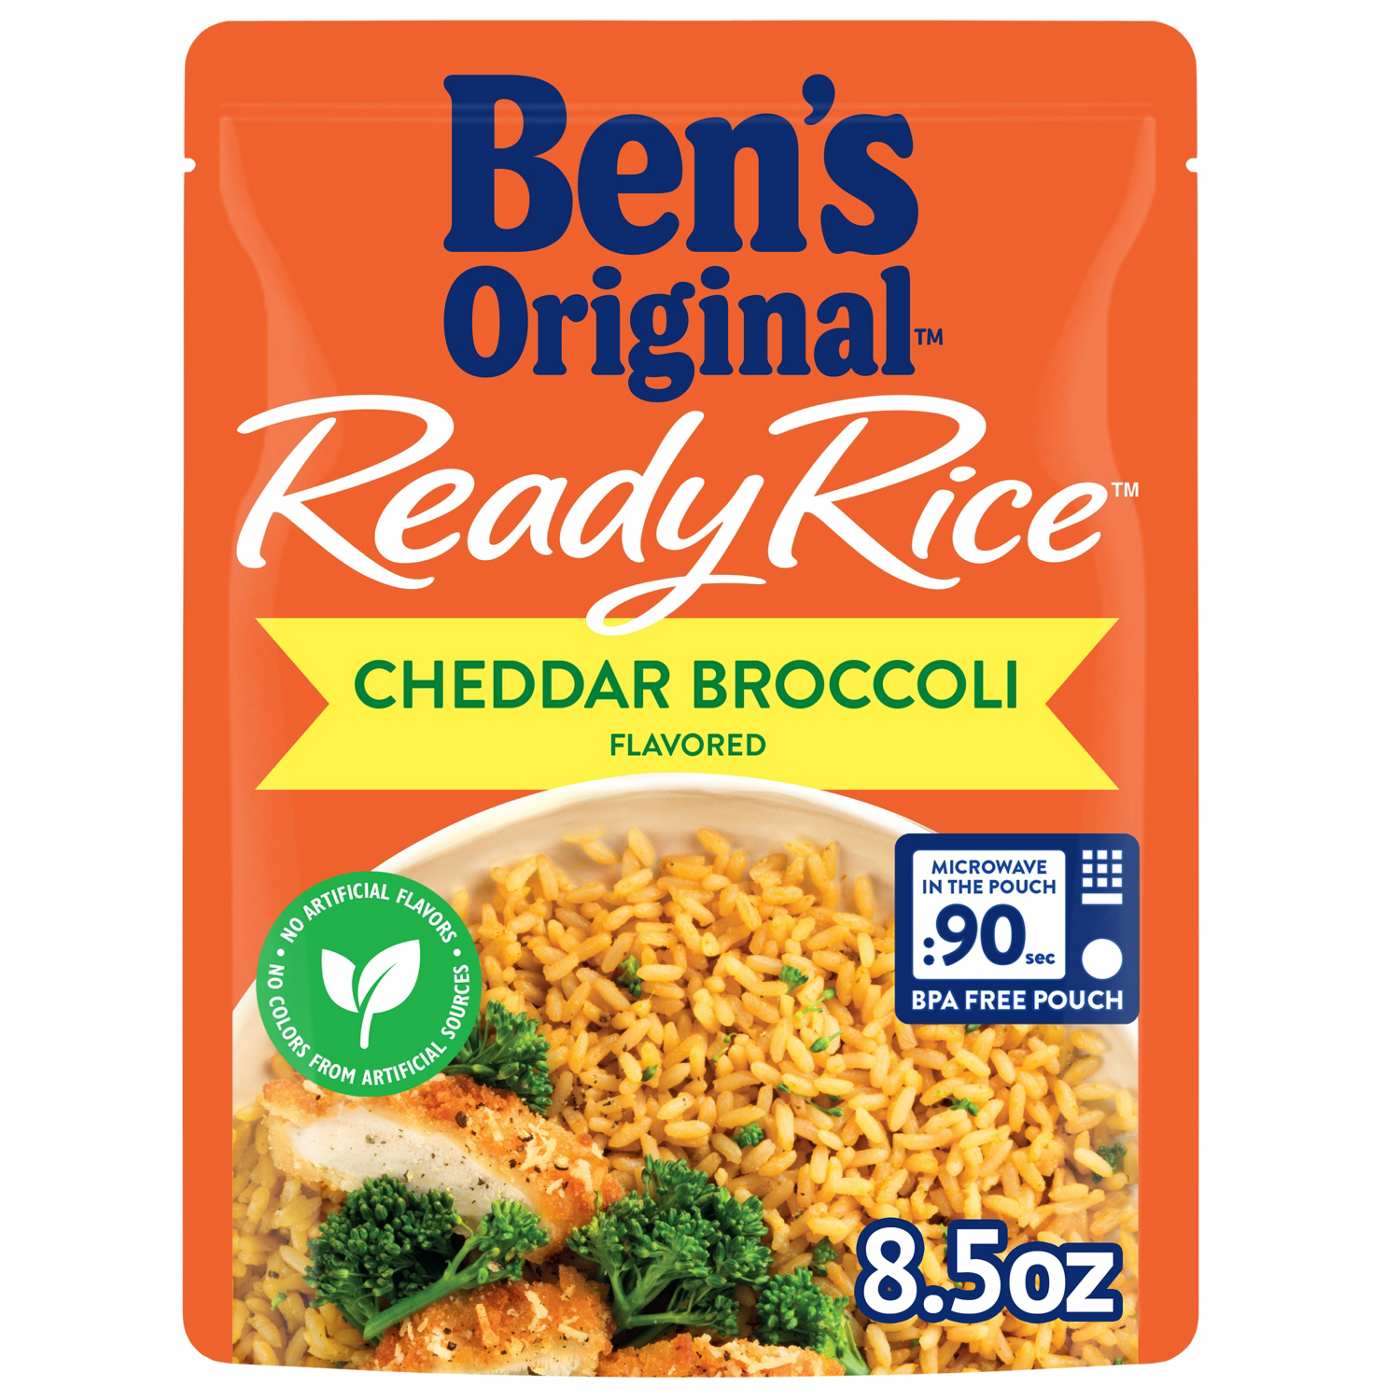 Ben's Original Ready Rice Cheddar Broccoli Flavored Rice; image 1 of 2